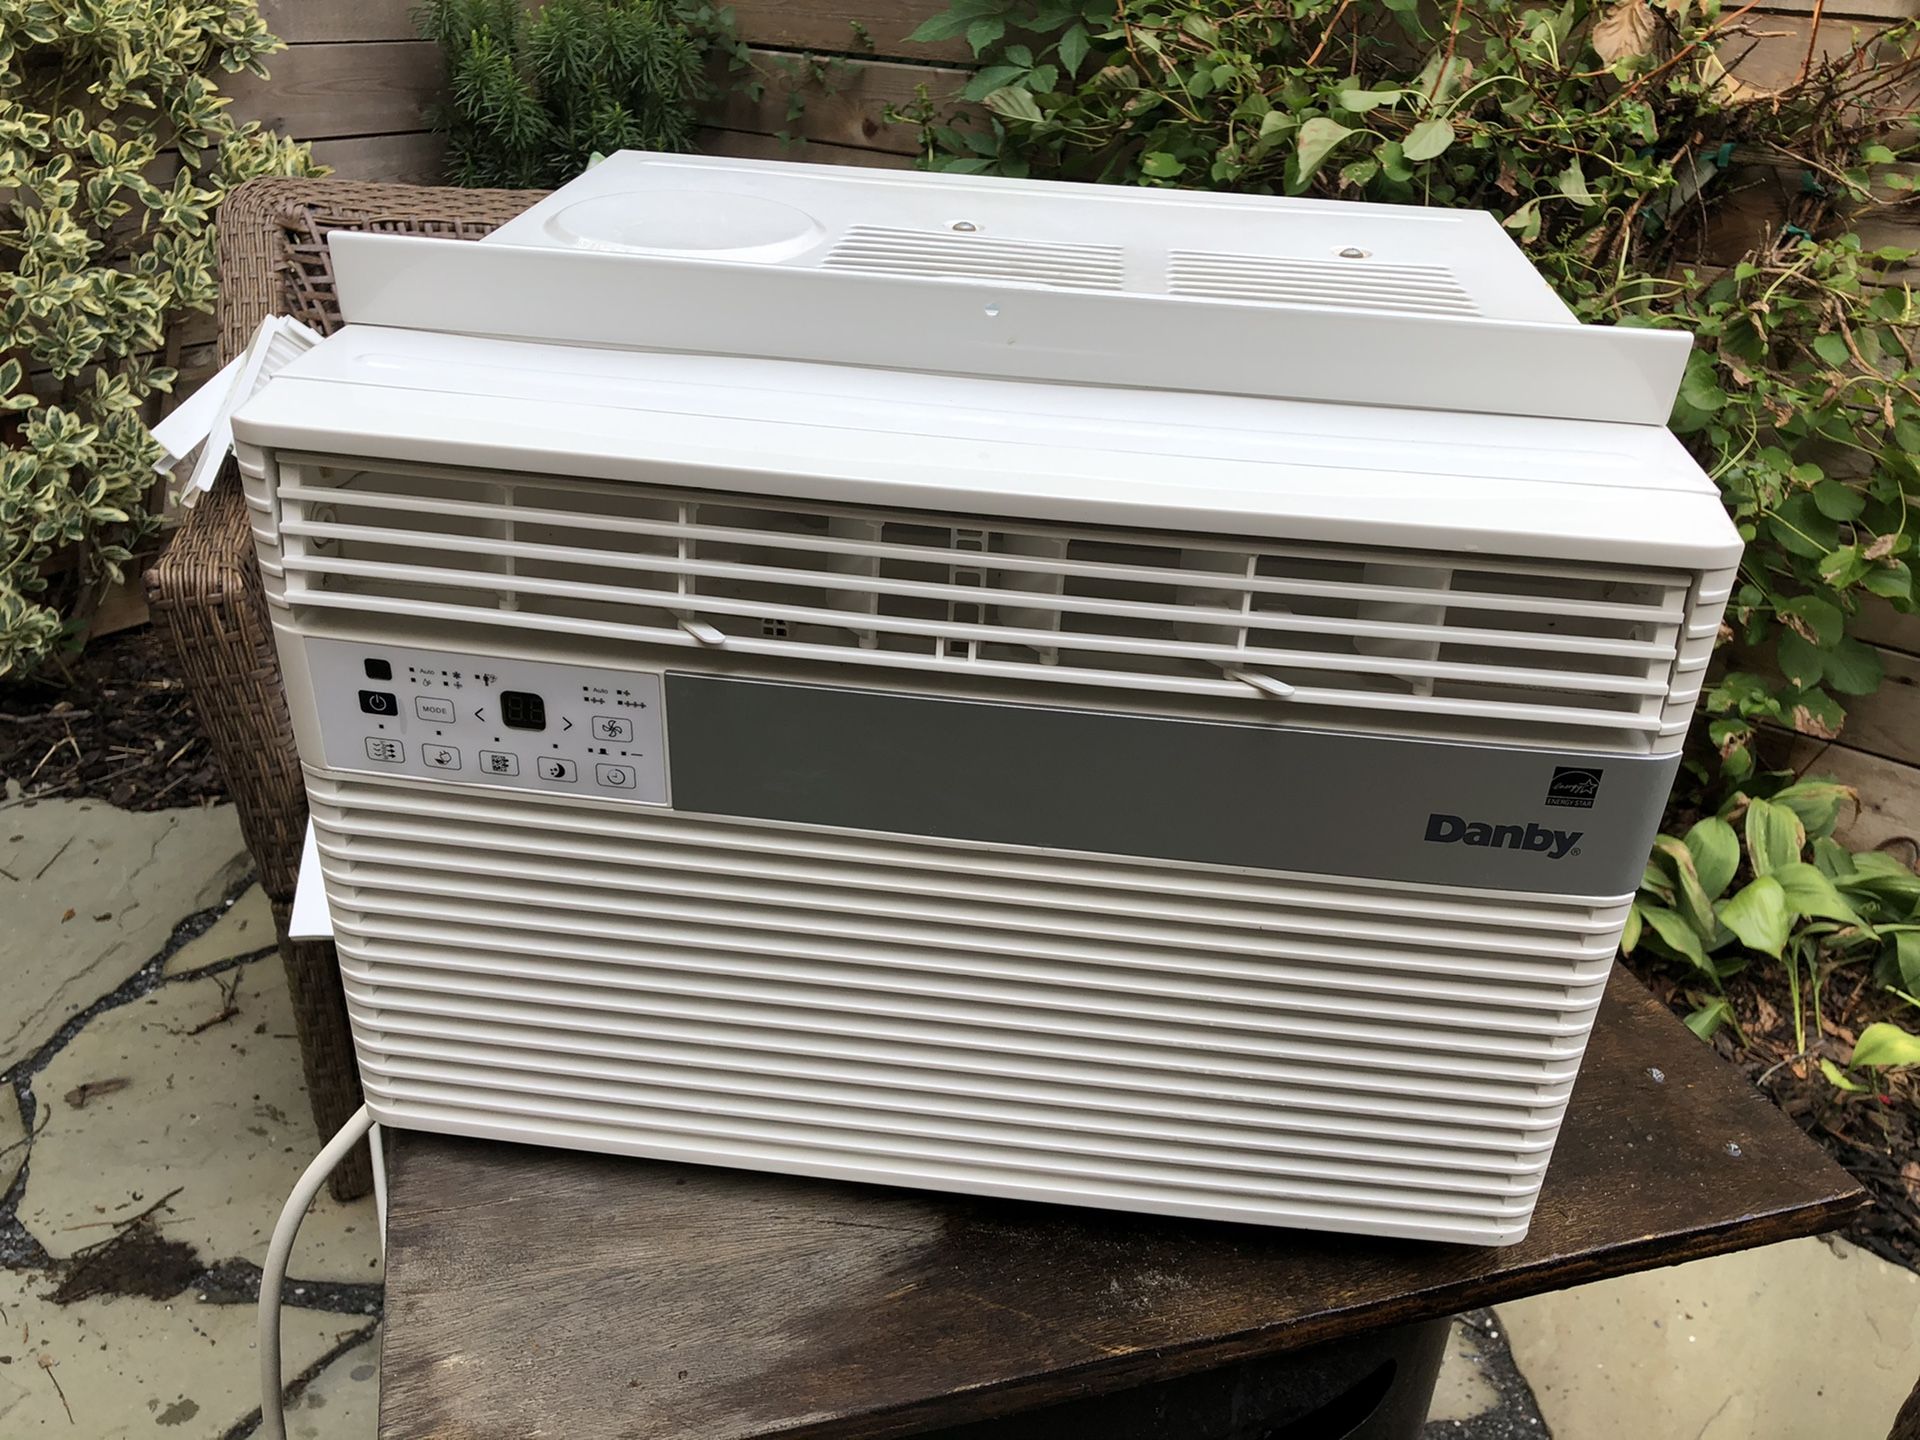 Air Conditioner - 8,000 BTU - Used 1 Year Old